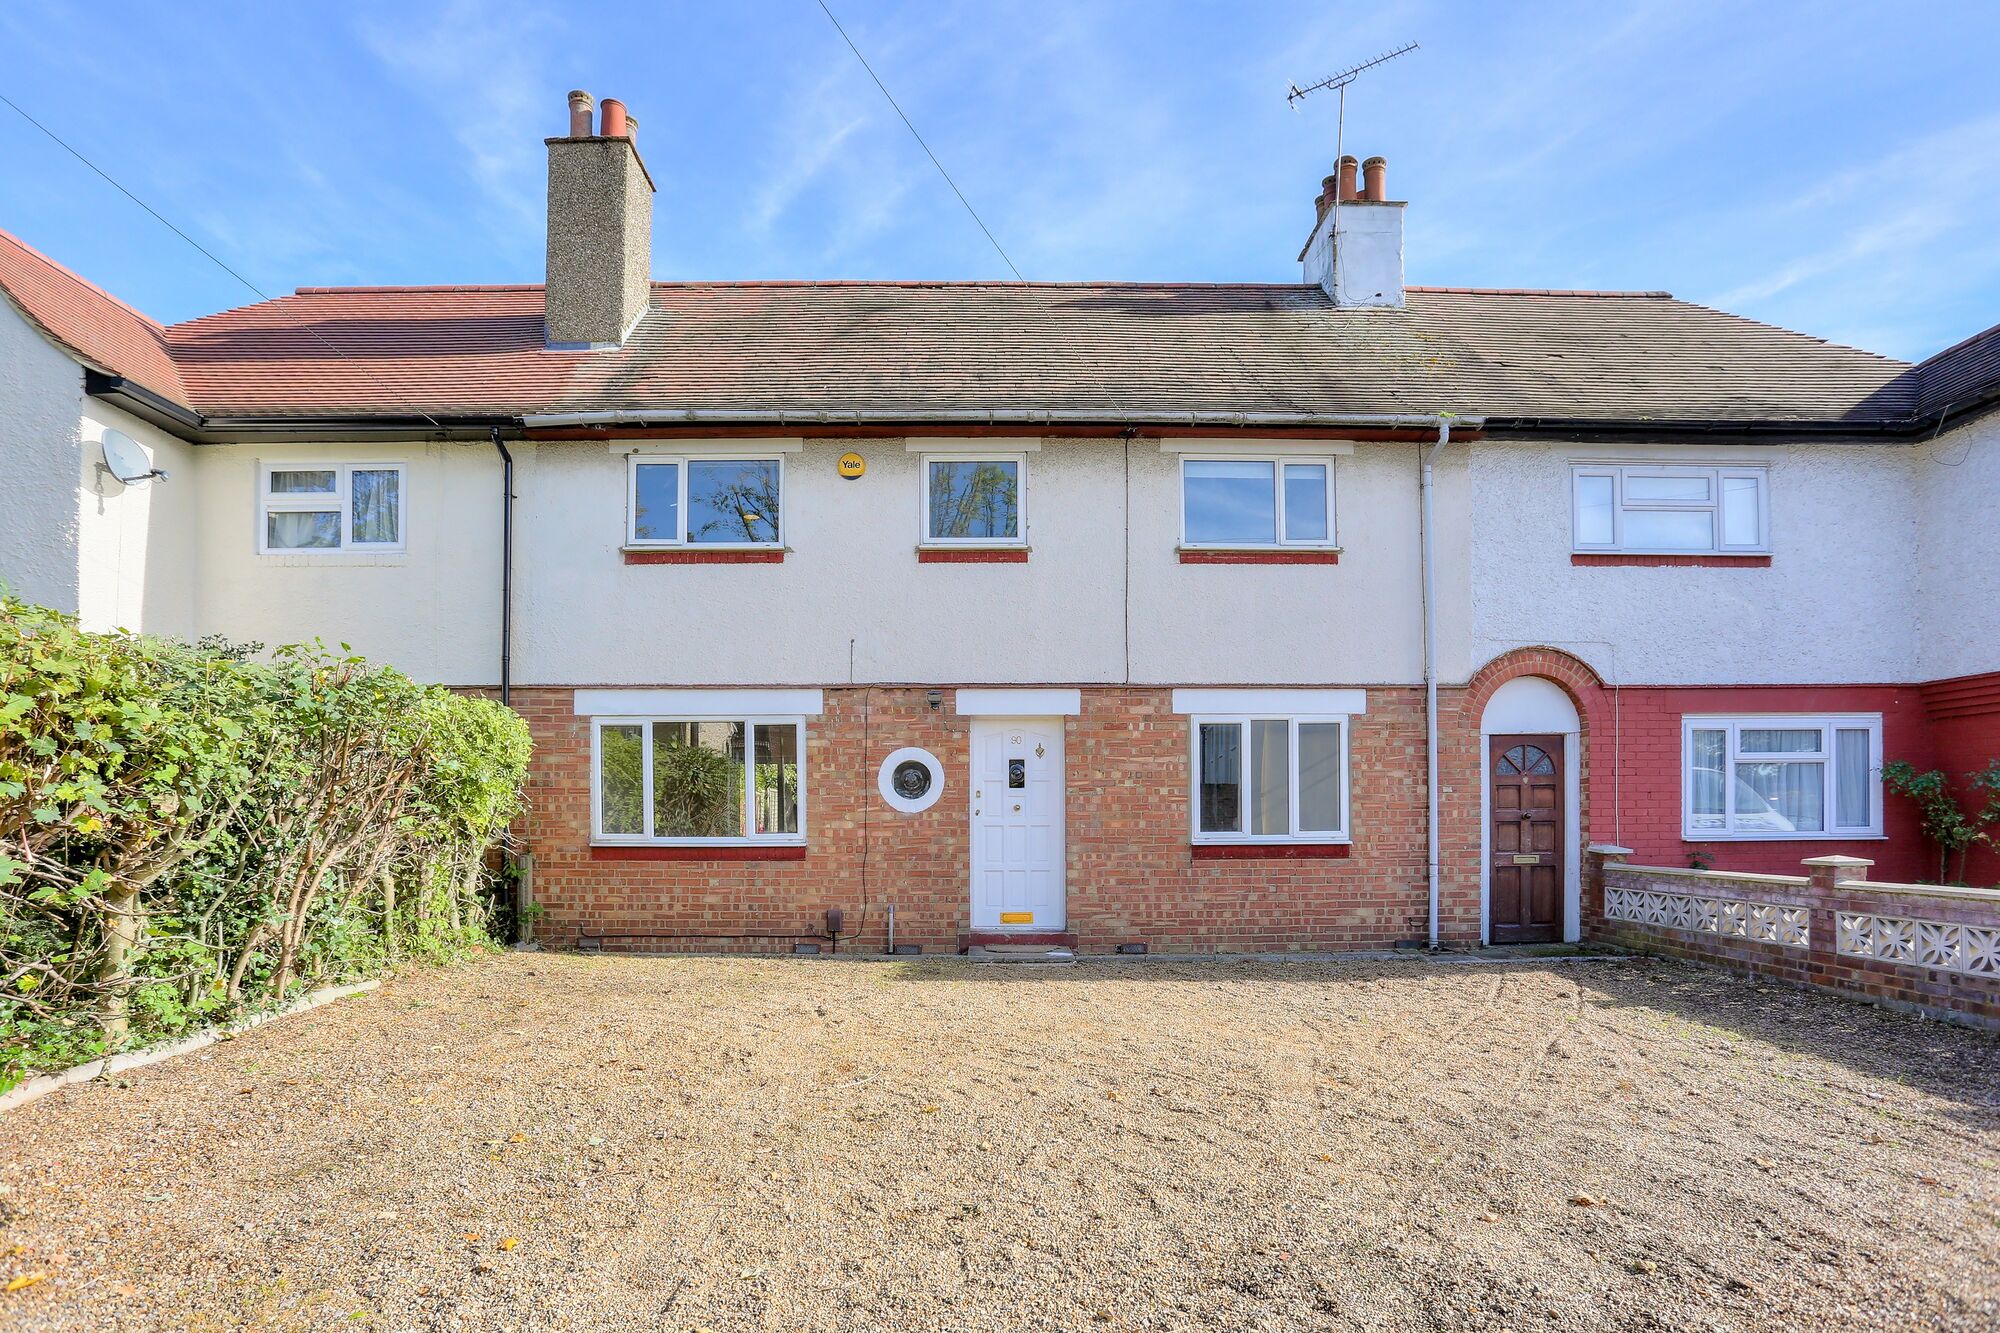 3 bedroom mid terraced house to rent, Available now Waverley Road, St Albans, AL3, main image